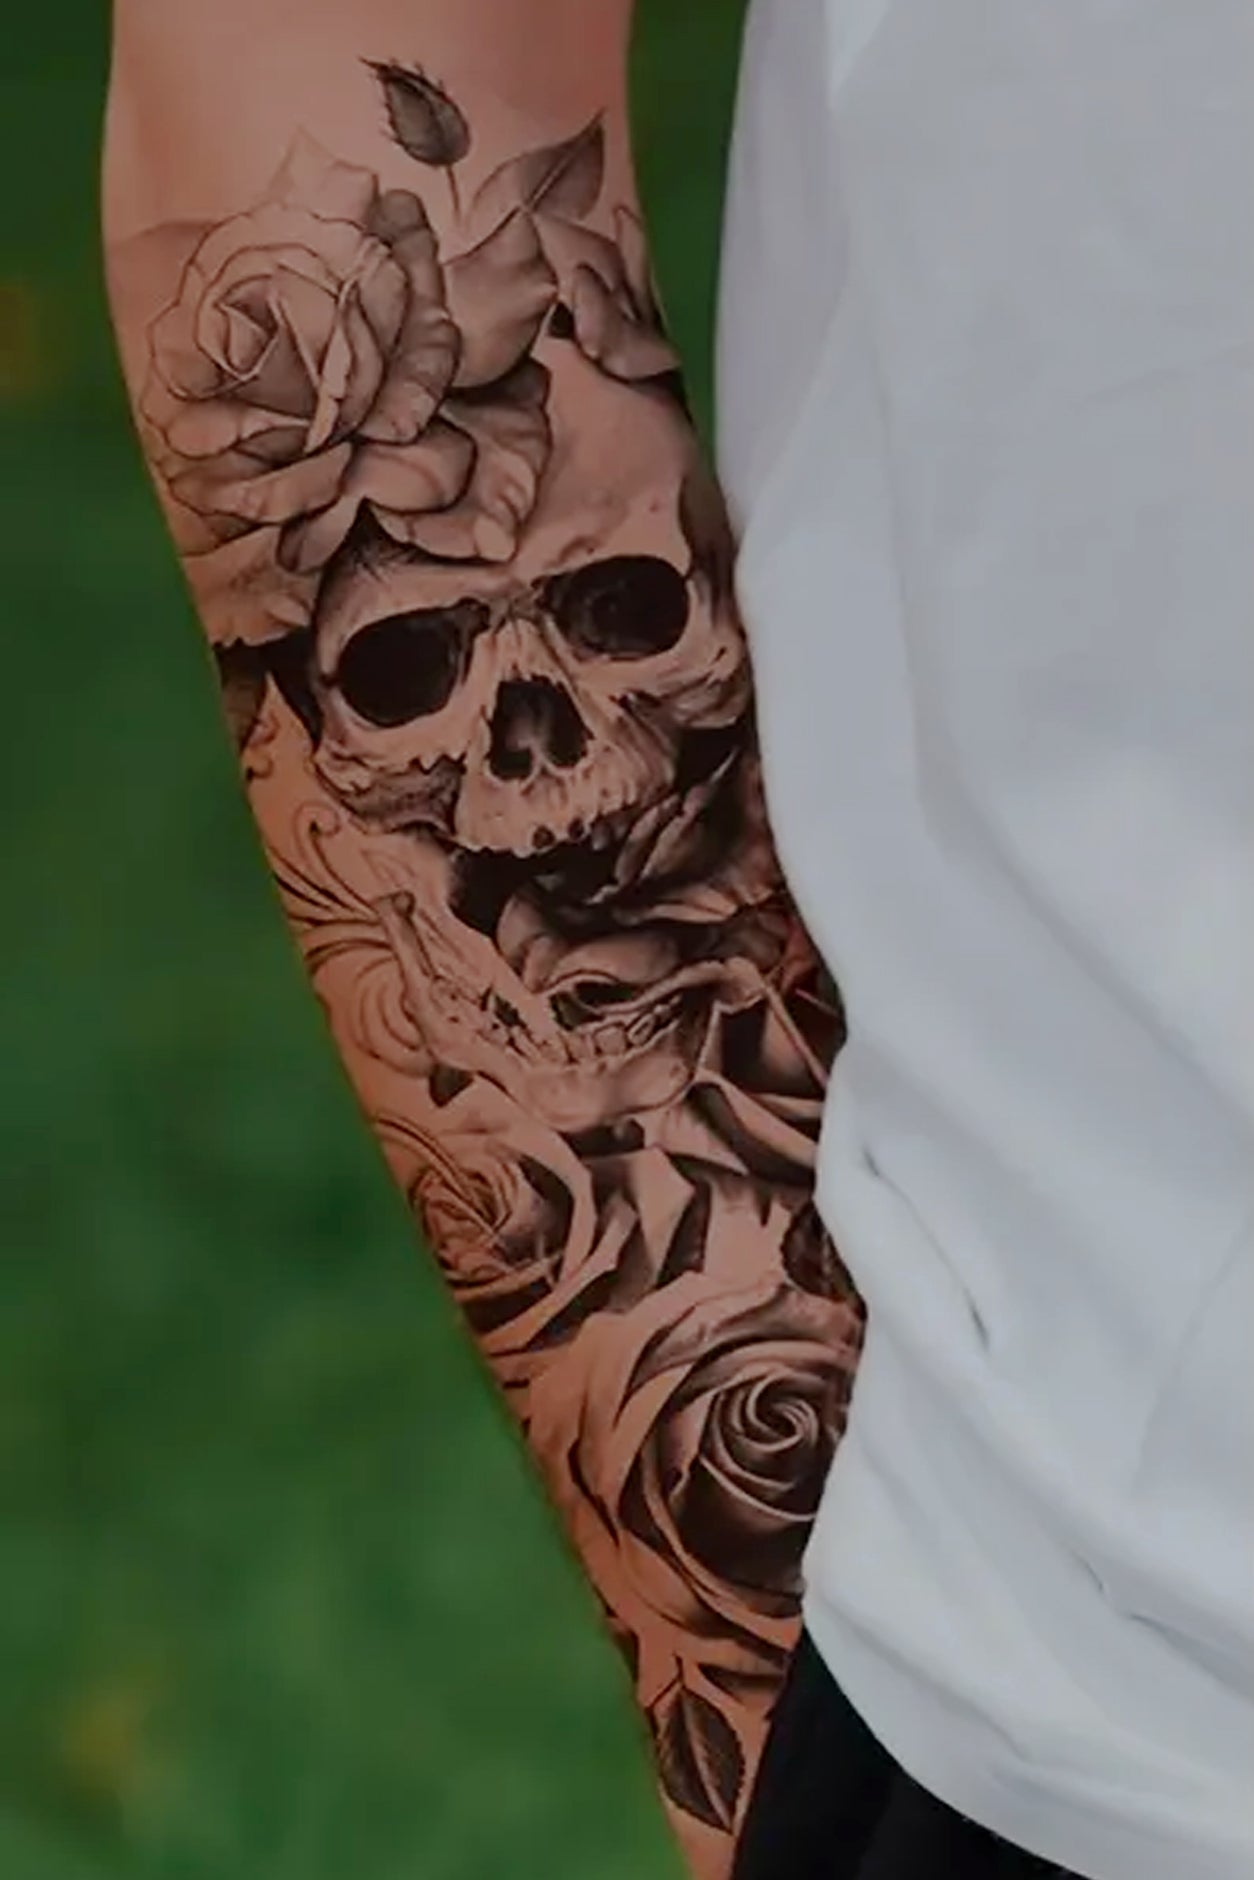 A gender-neutral arm displays the skull and roses tattoo. The skull’s former owner celebrates his life with roses, the ultimate symbol of spirituality, purity, and innocence, a perfect tat for an arm or any body part. The art is tradtional black ink.